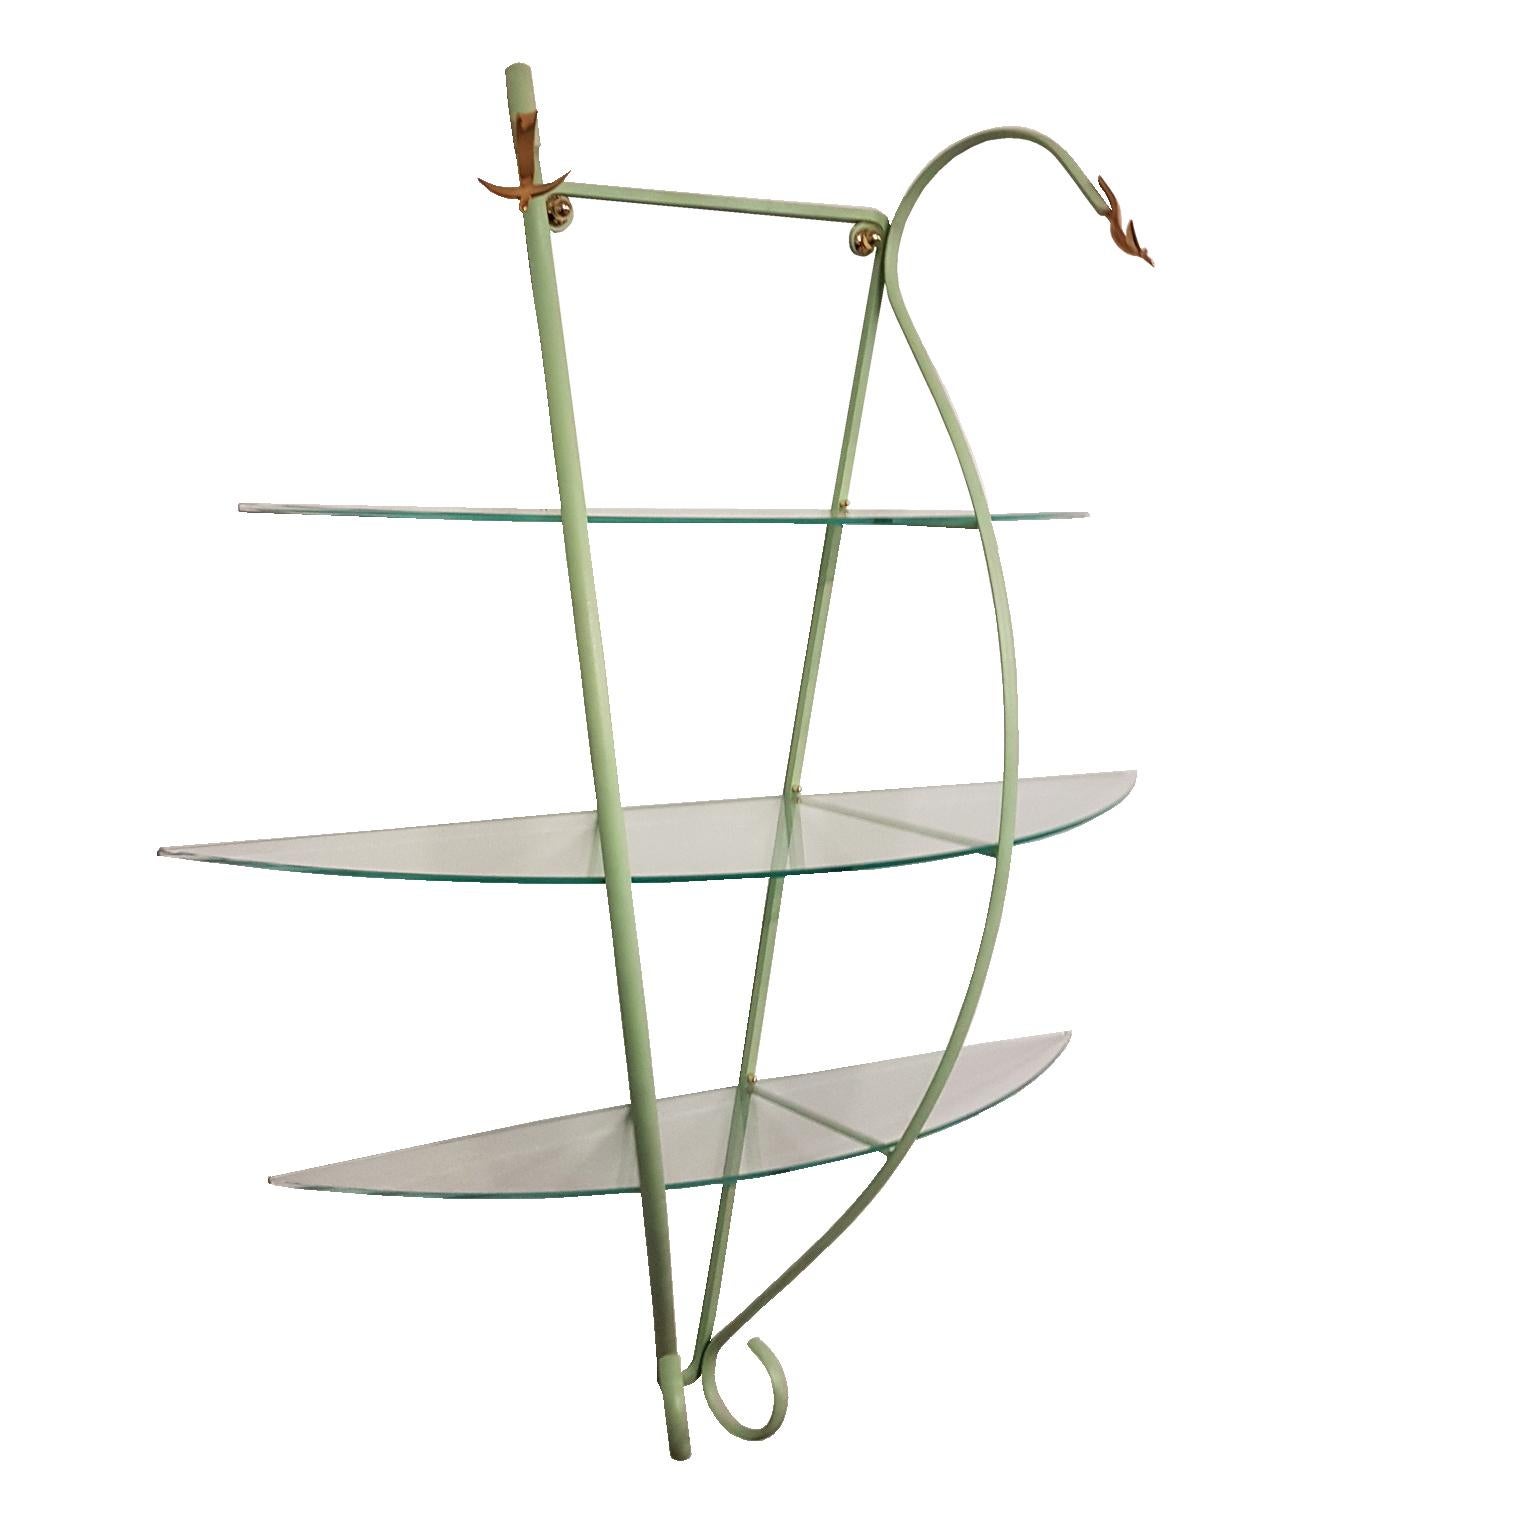 Italian Zanotta Green Steel Wall Decoration with Glass Shelves, Limited Edition For Sale 2